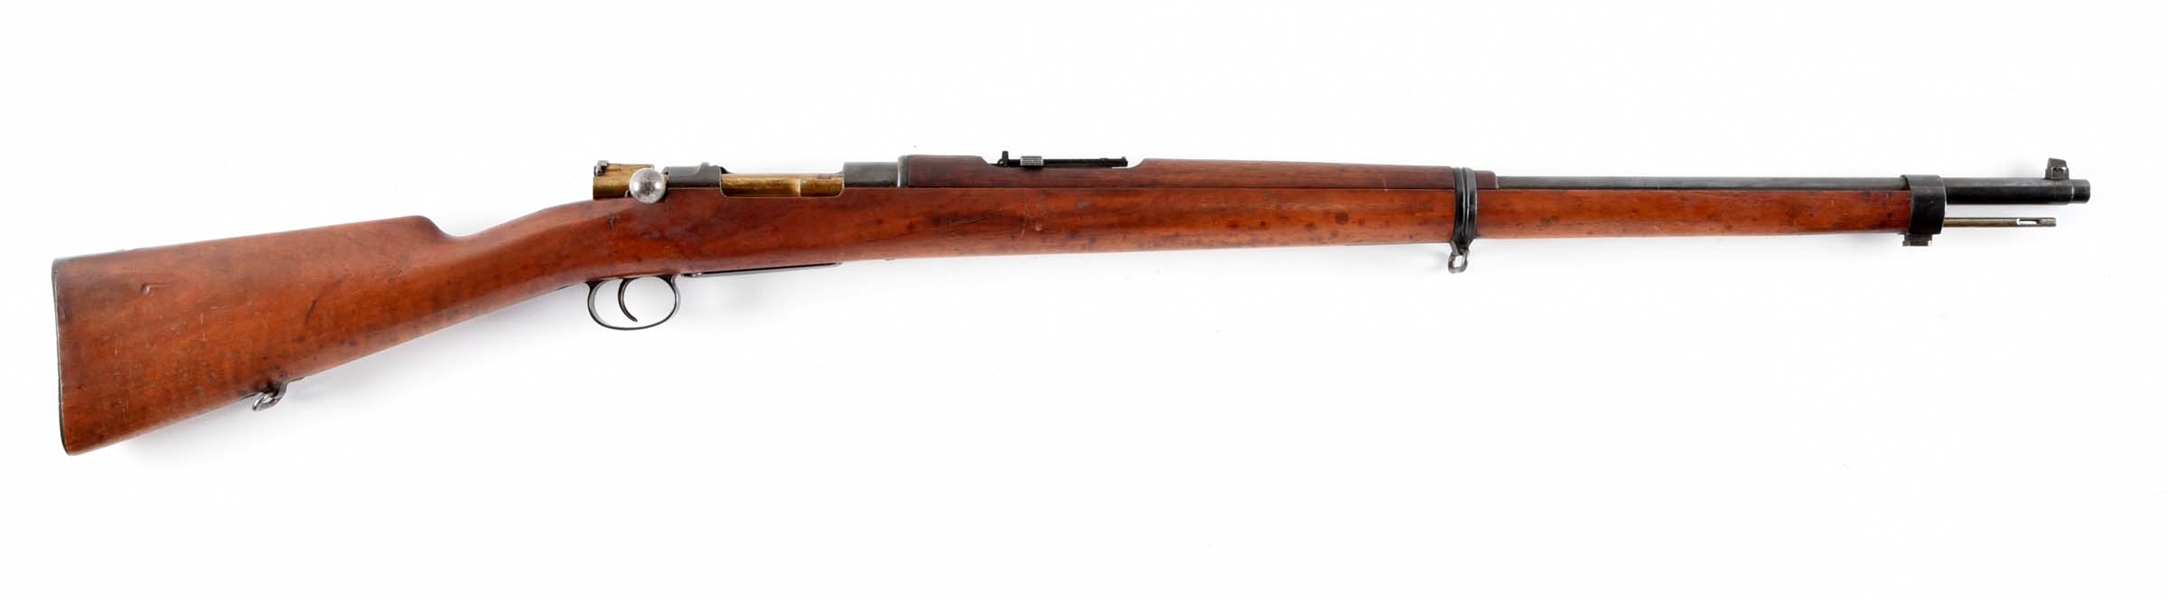 (A) CHILEAN M1895 MAUSER BOLT ACTION RIFLE MADE BY LOEWE.